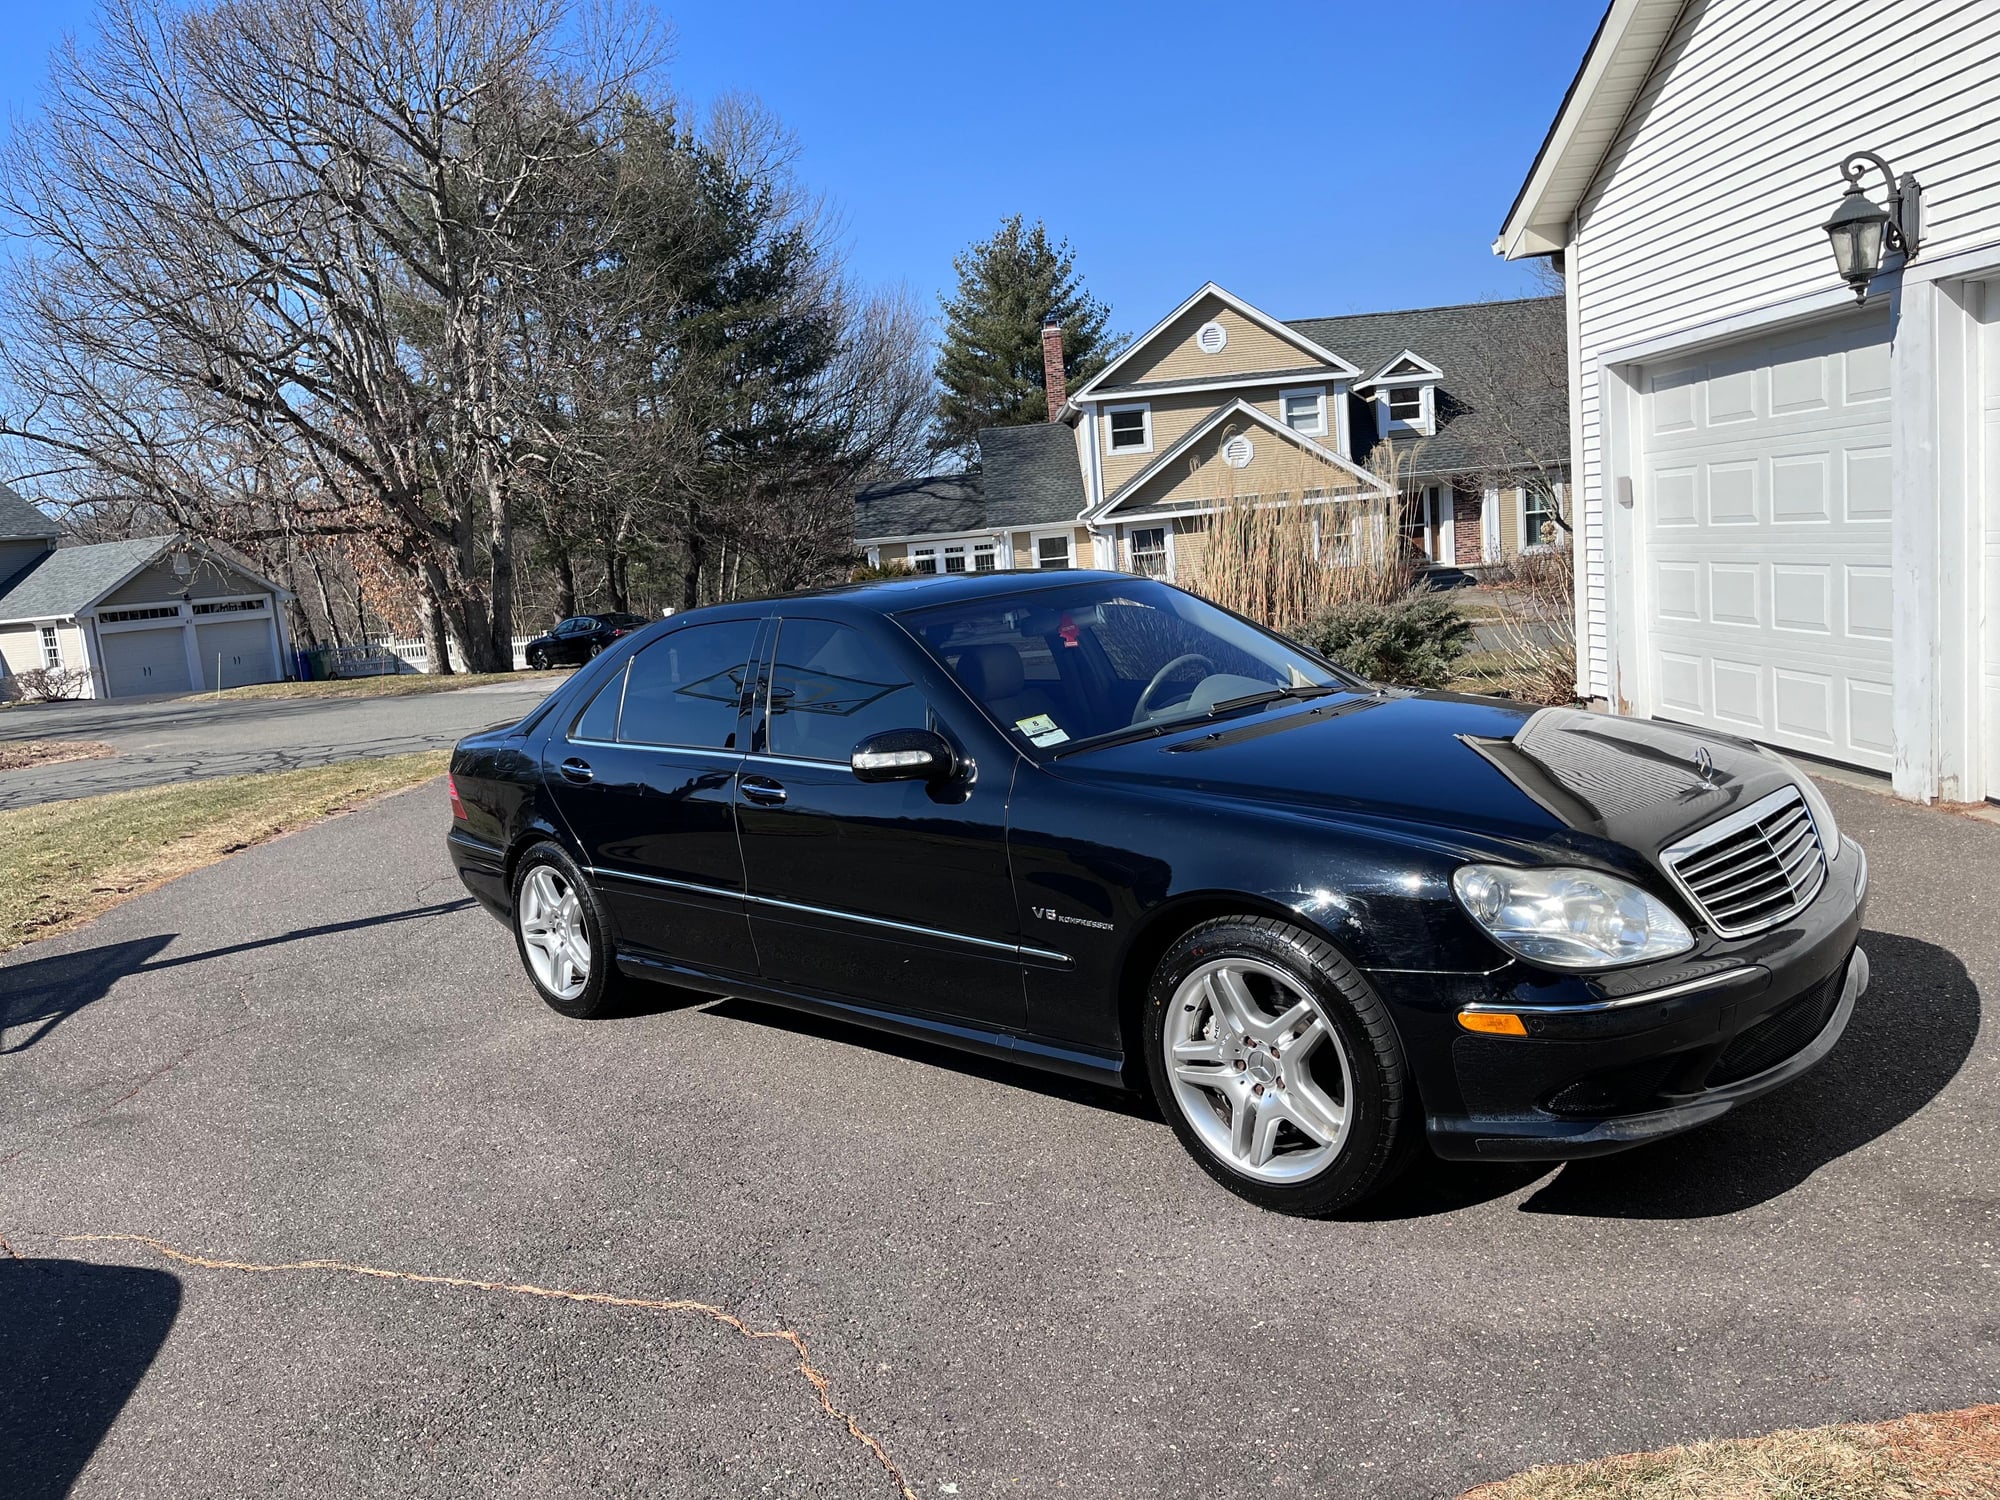 2003 Mercedes-Benz S55 AMG - 80k miles 2003 S55 AMG - Used - VIN wdbng74j53a337371 - 80,000 Miles - 8 cyl - 2WD - Automatic - Sedan - Black - Glastonbury, CT 06033, United States